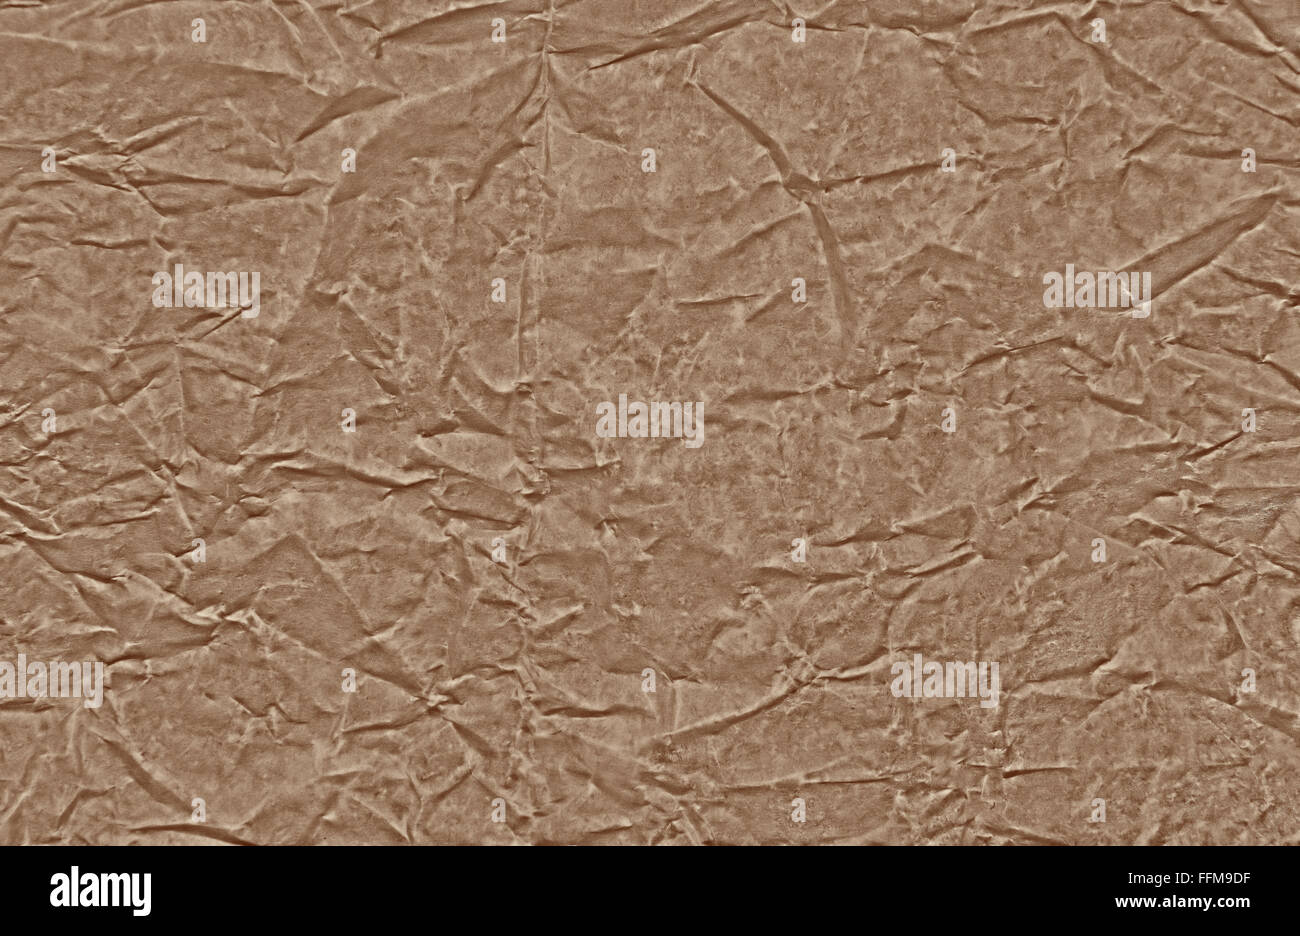 A sheet of brown grainy clear creased parchment paper, interesting background and texture. Horizontal view. Stock Photo